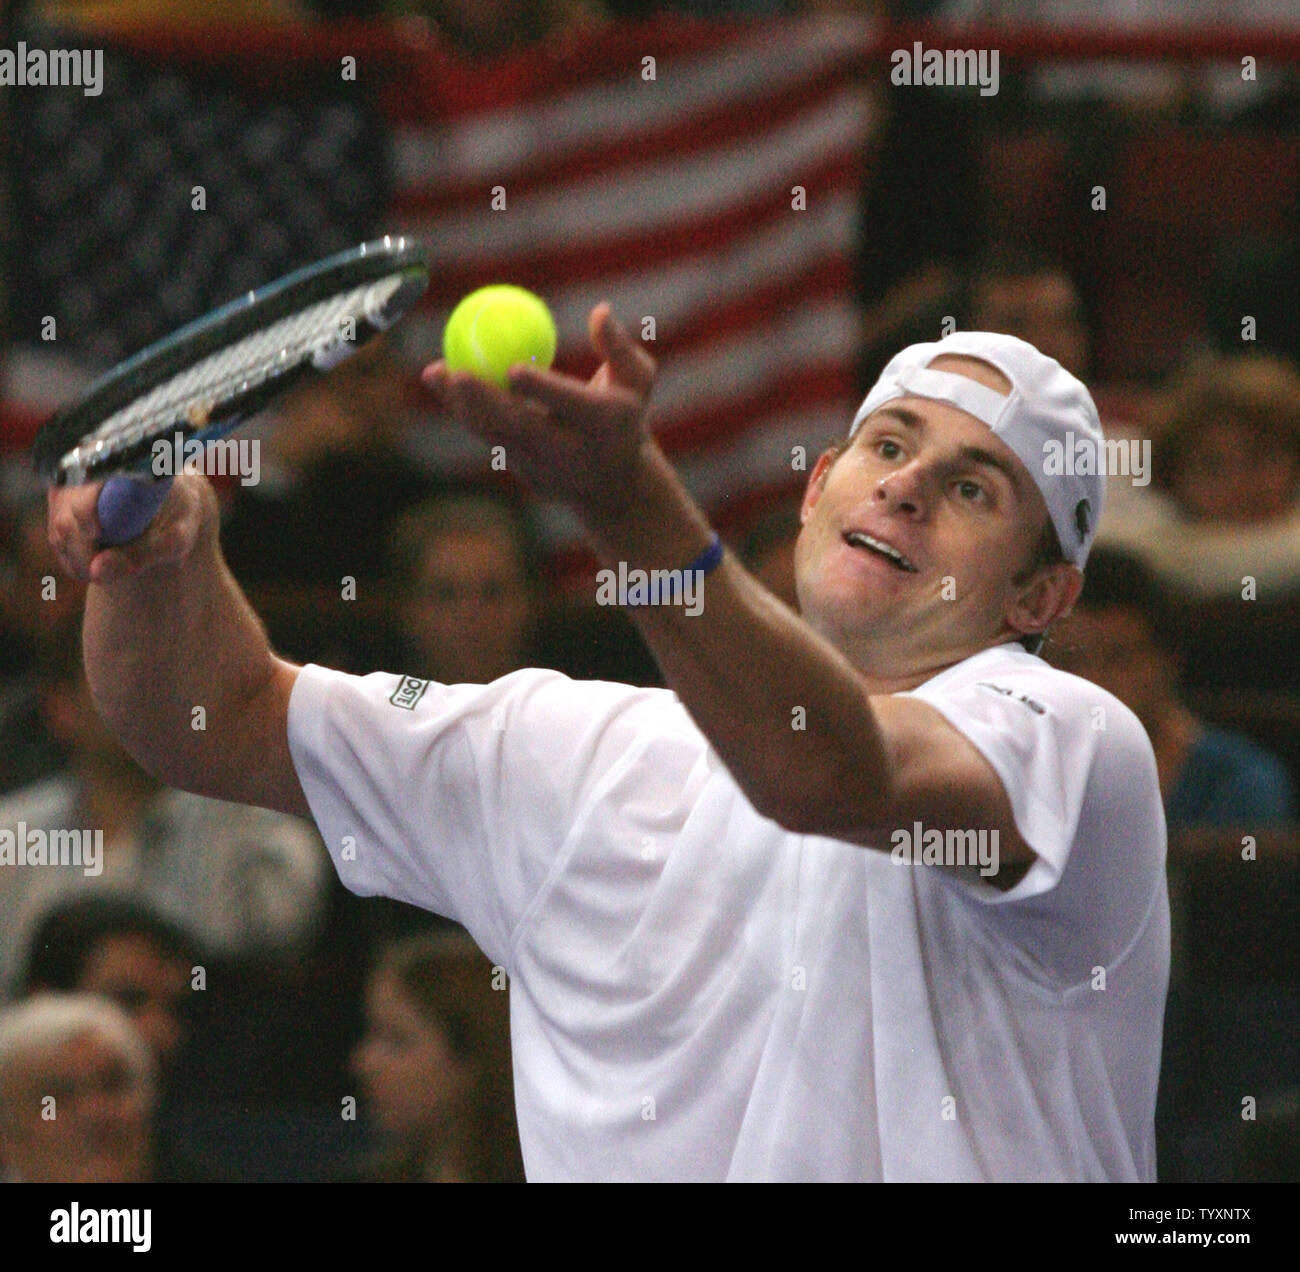 American Andy Roddick prepares to serve during his quarterfinal match with Spaniard David Ferrer at the BNP Paribas Masters tournament in Paris, France on November 4, 2005.  Roddick went on to defeat Ferrer 2-6, 6-3, 7-6 (8) to advance to the semifinals.      (UPI Photo/David Silpa) Stock Photo